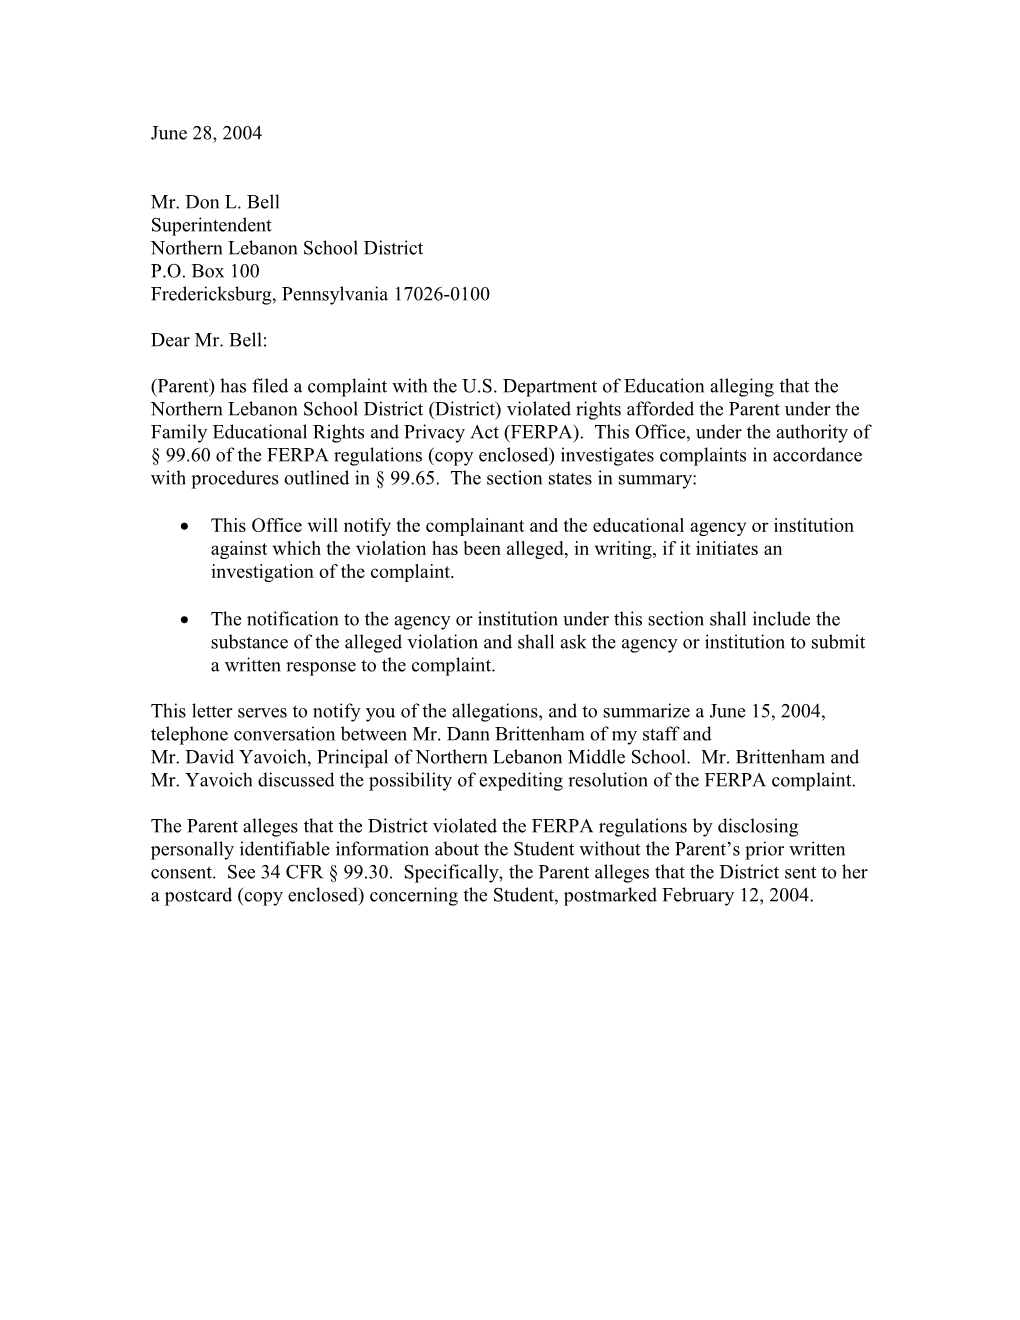 Letter to Northern Lebanon School District Re: Disclosure of Education Records on Postcards